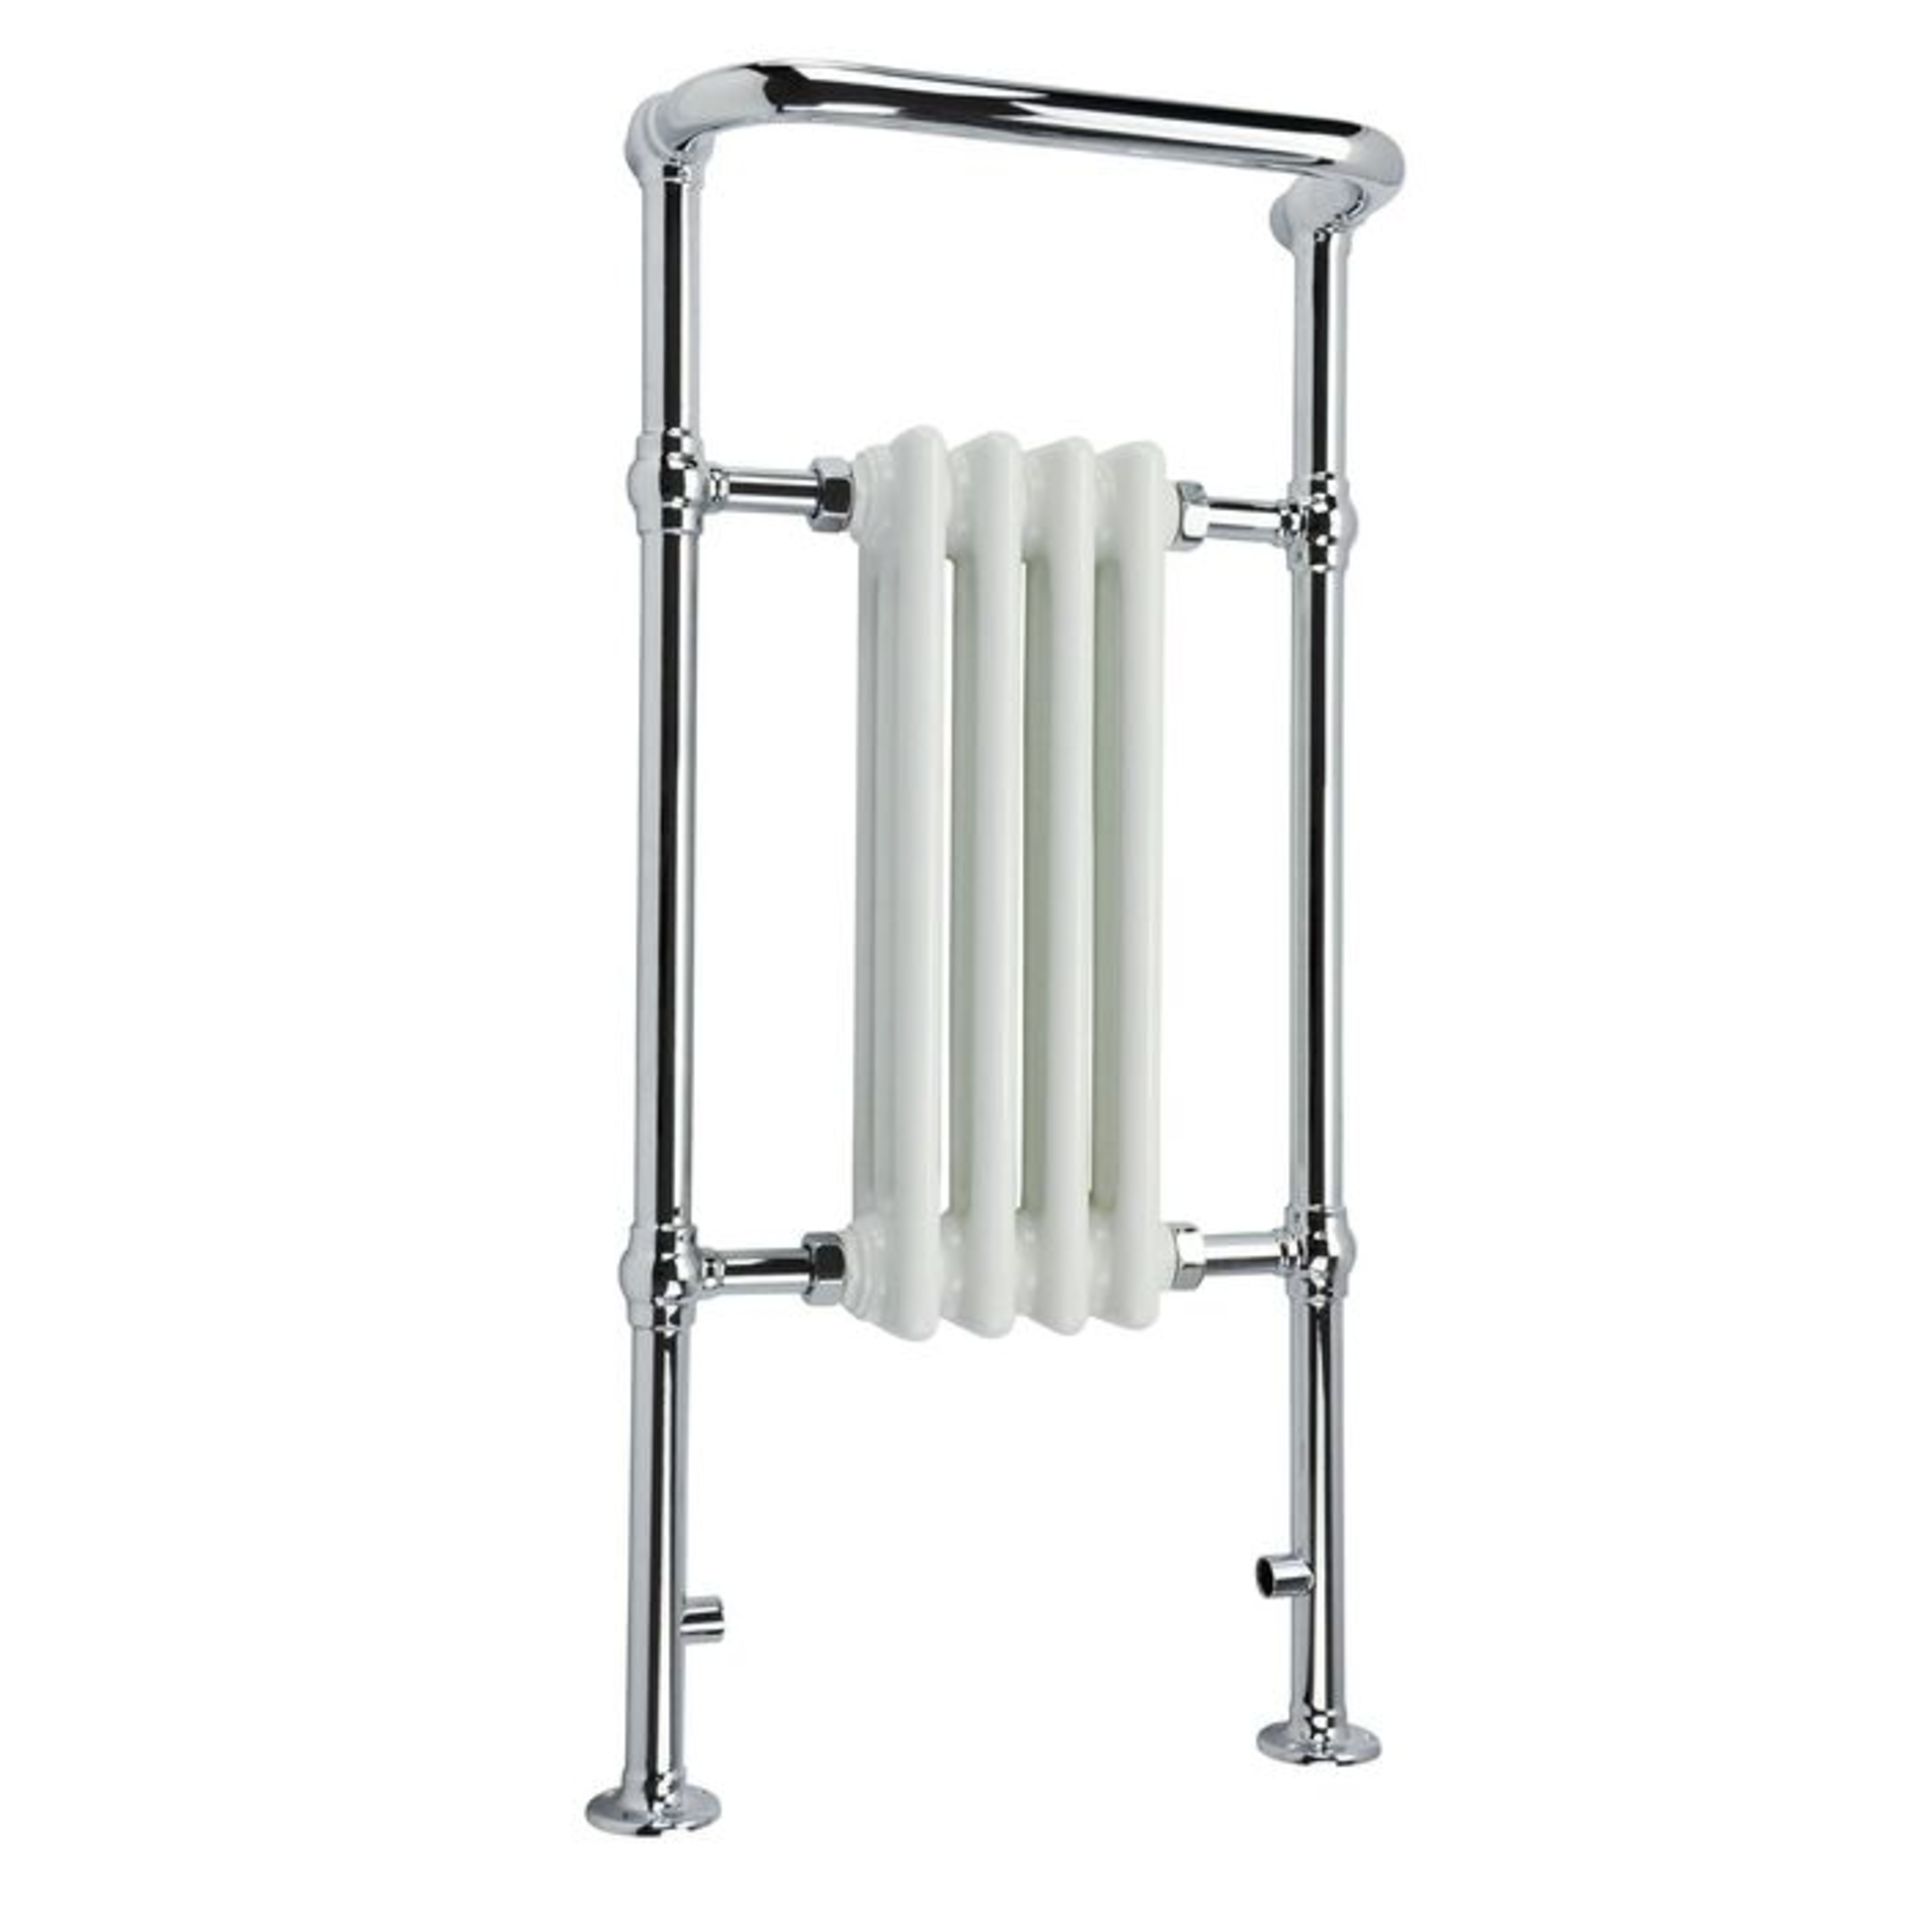 (JL46) 952x479mm Small Traditional White Towel Rail Radiator - Cambridge. RRP £414.99. We love... - Image 3 of 3